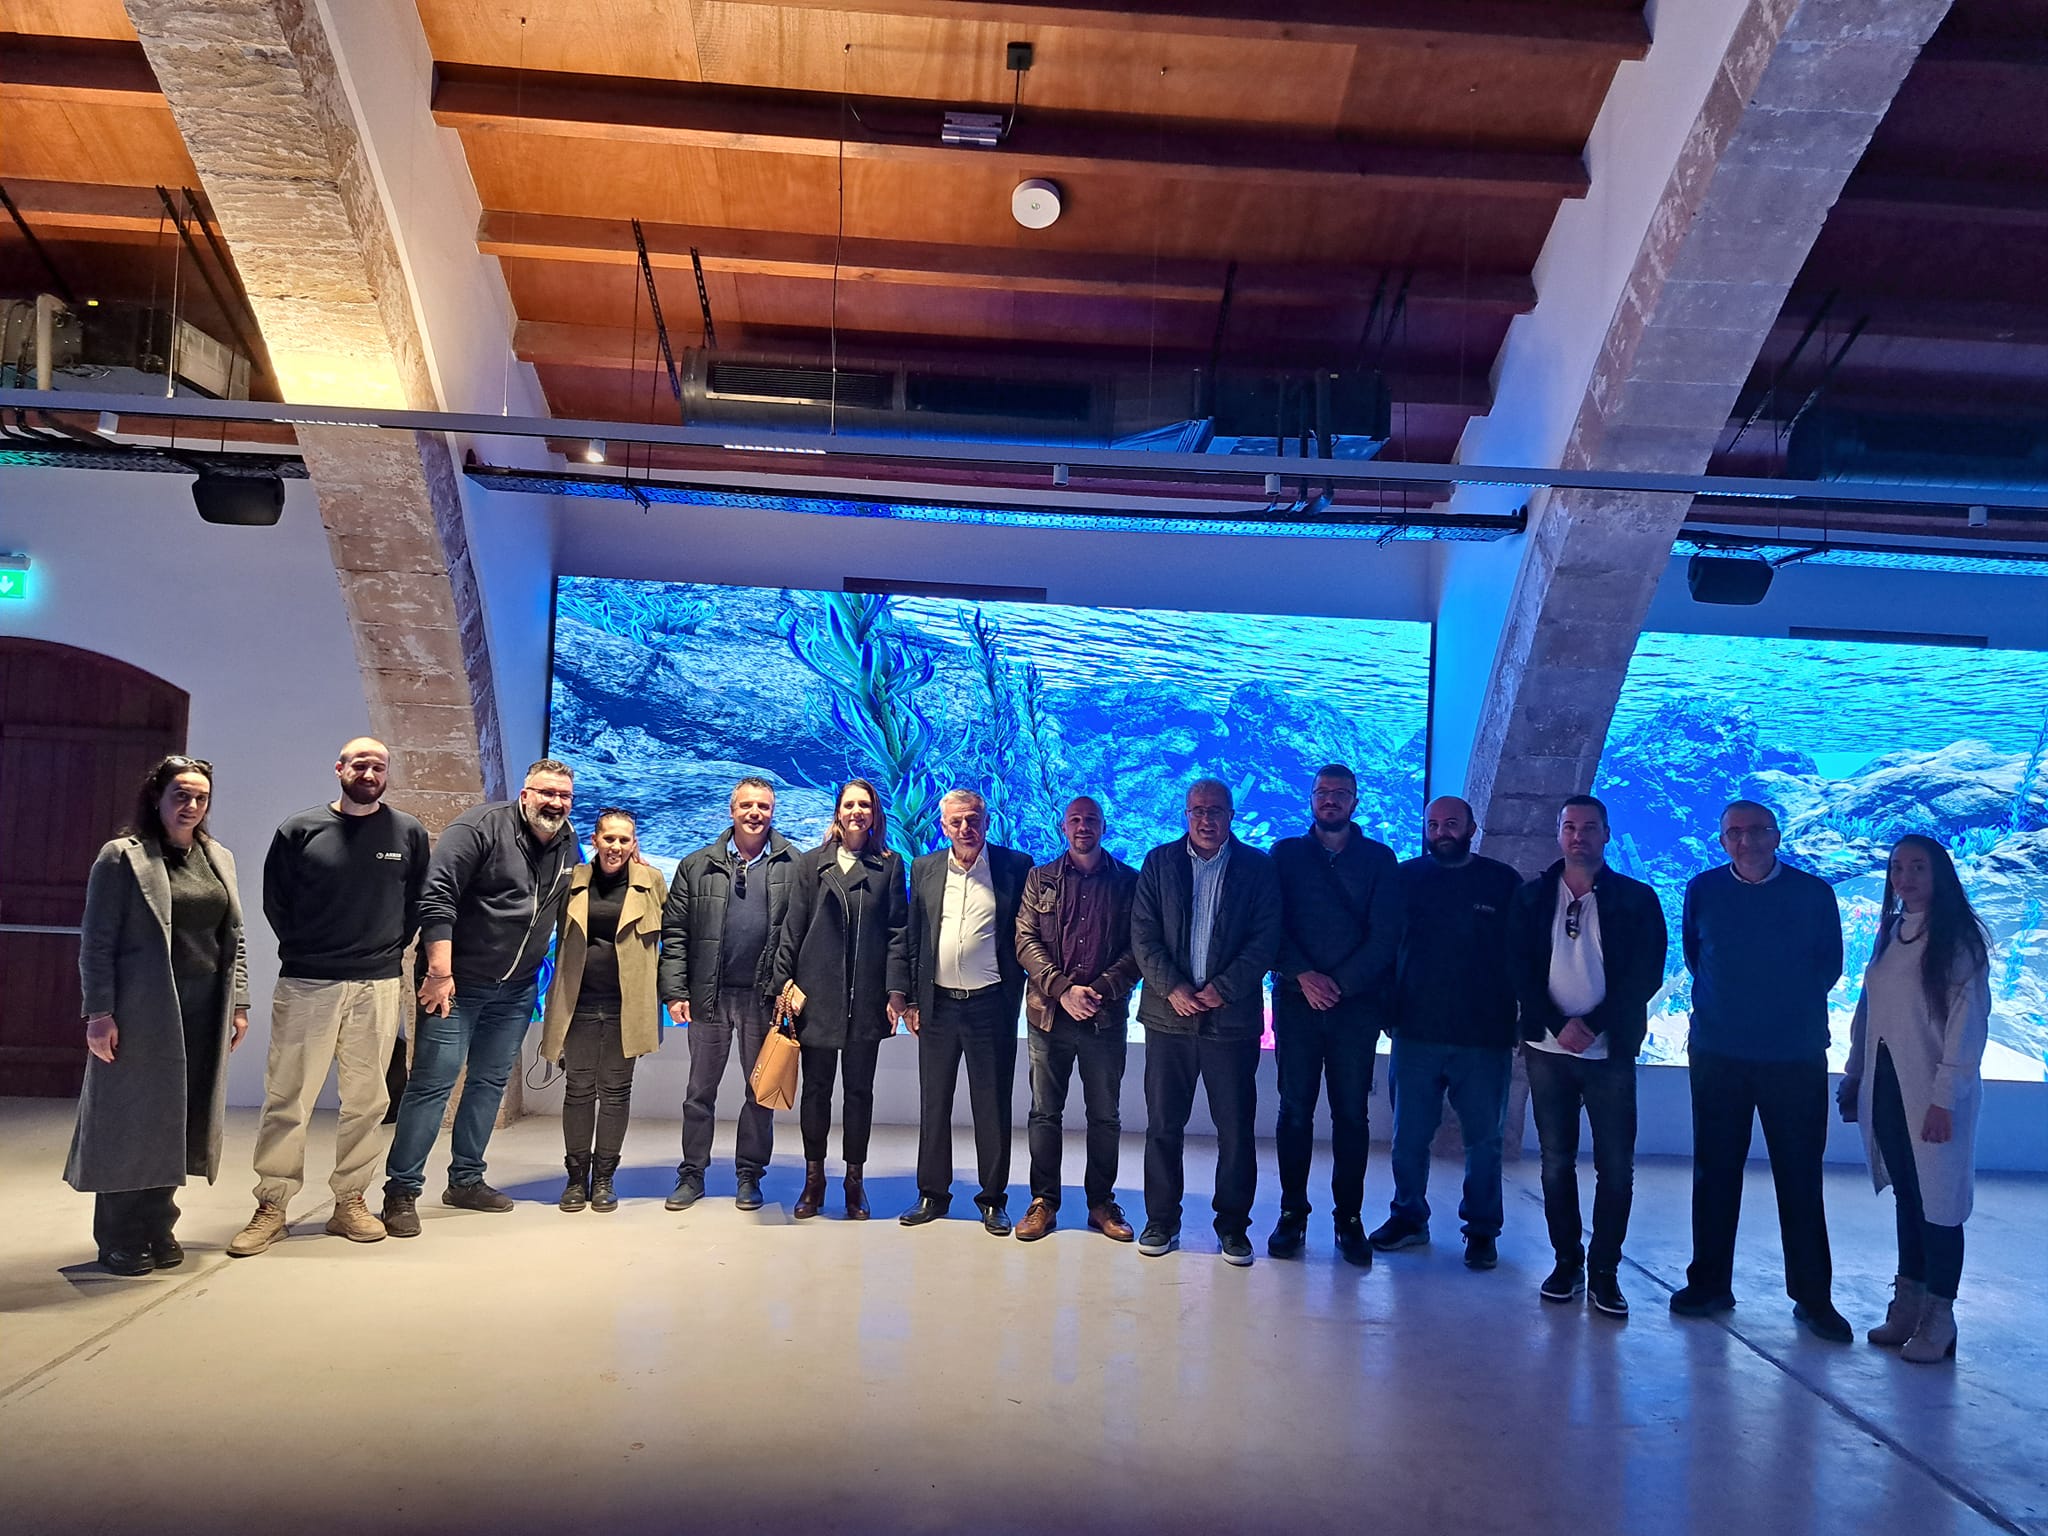 The Sea and Culture Museum, Polis and Latsi will place visitors in the center of the exhibition, thanks to the largest LED video wall in Cyprus museums